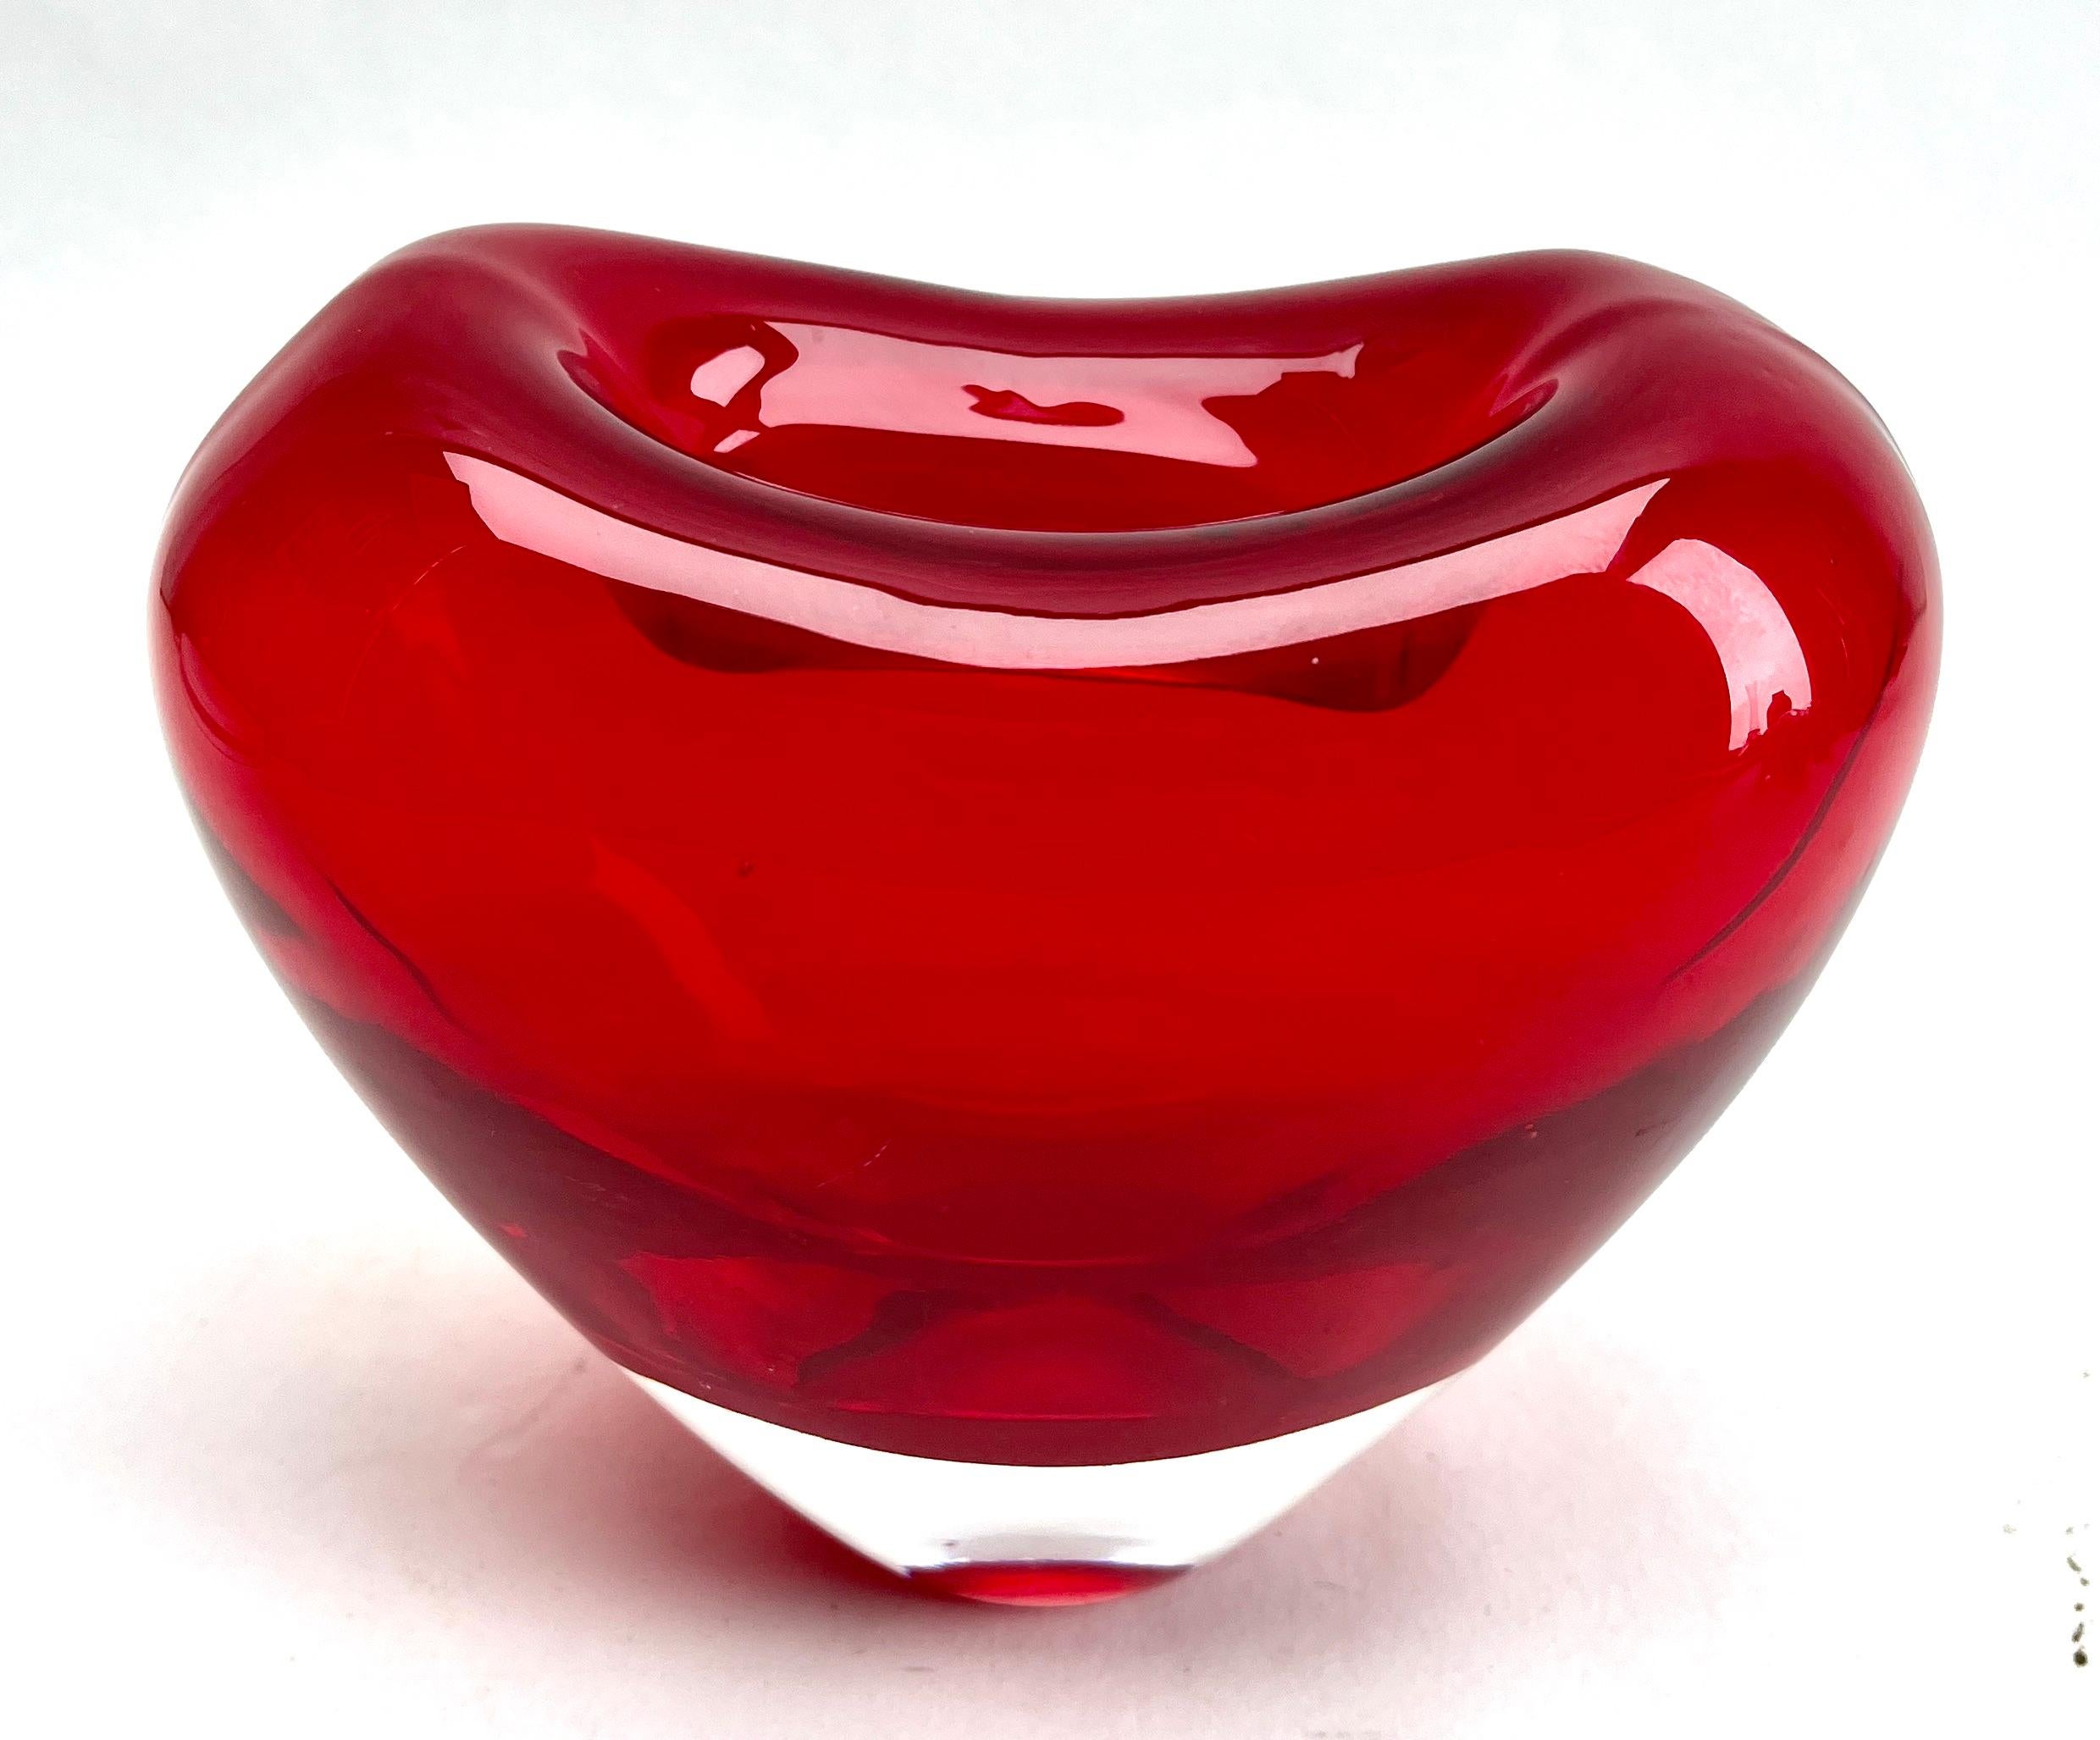 The iconic heart-shaped vase. Salviati collection, designed by Maria Christina Hamel. Ruby red heart with flat base. Hand-blown Murano glass.

The piece is in excellent condition and a real beauty!

Please don't hesitate to get in touch with any